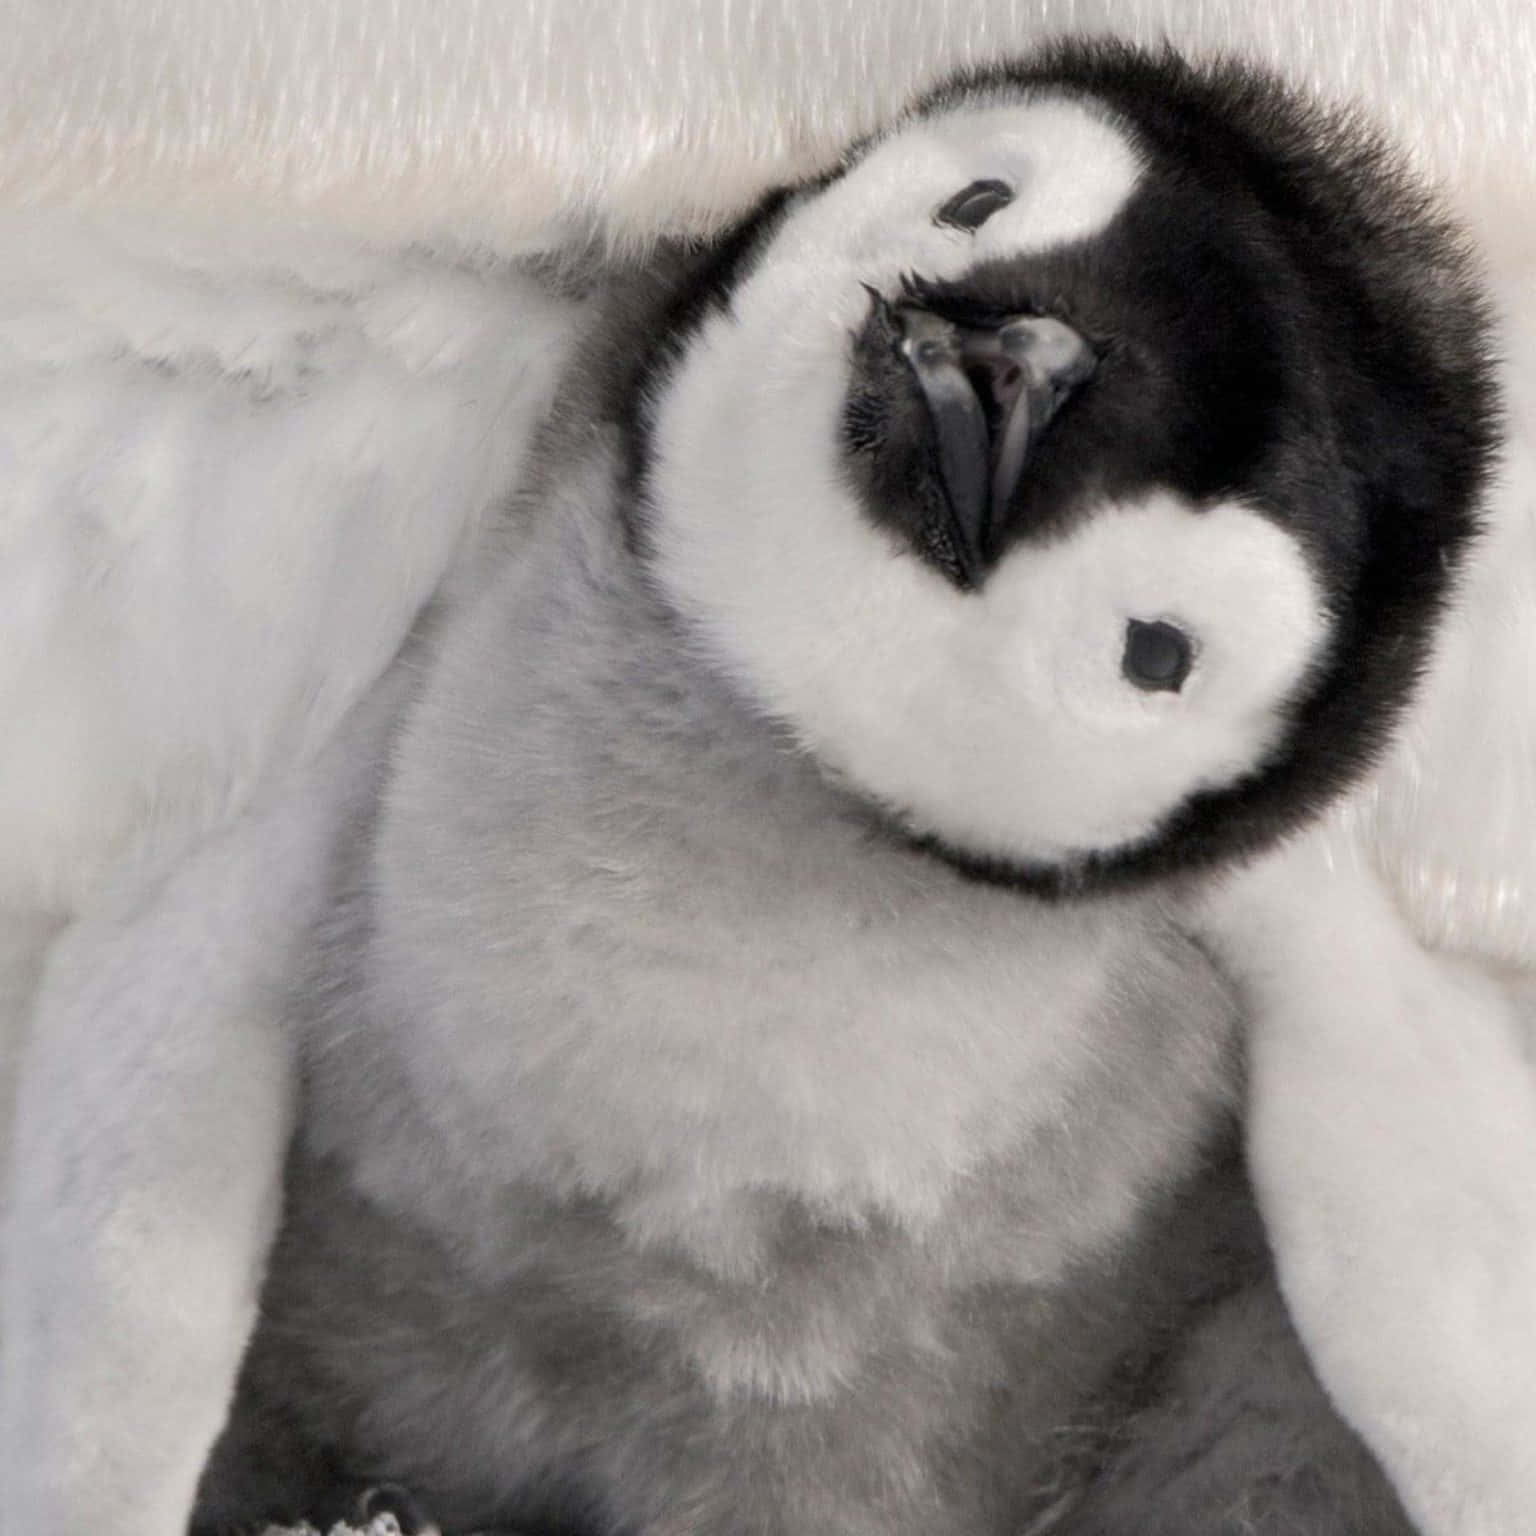 Download Aww, look at this cute and cuddly baby penguin! | Wallpapers.com